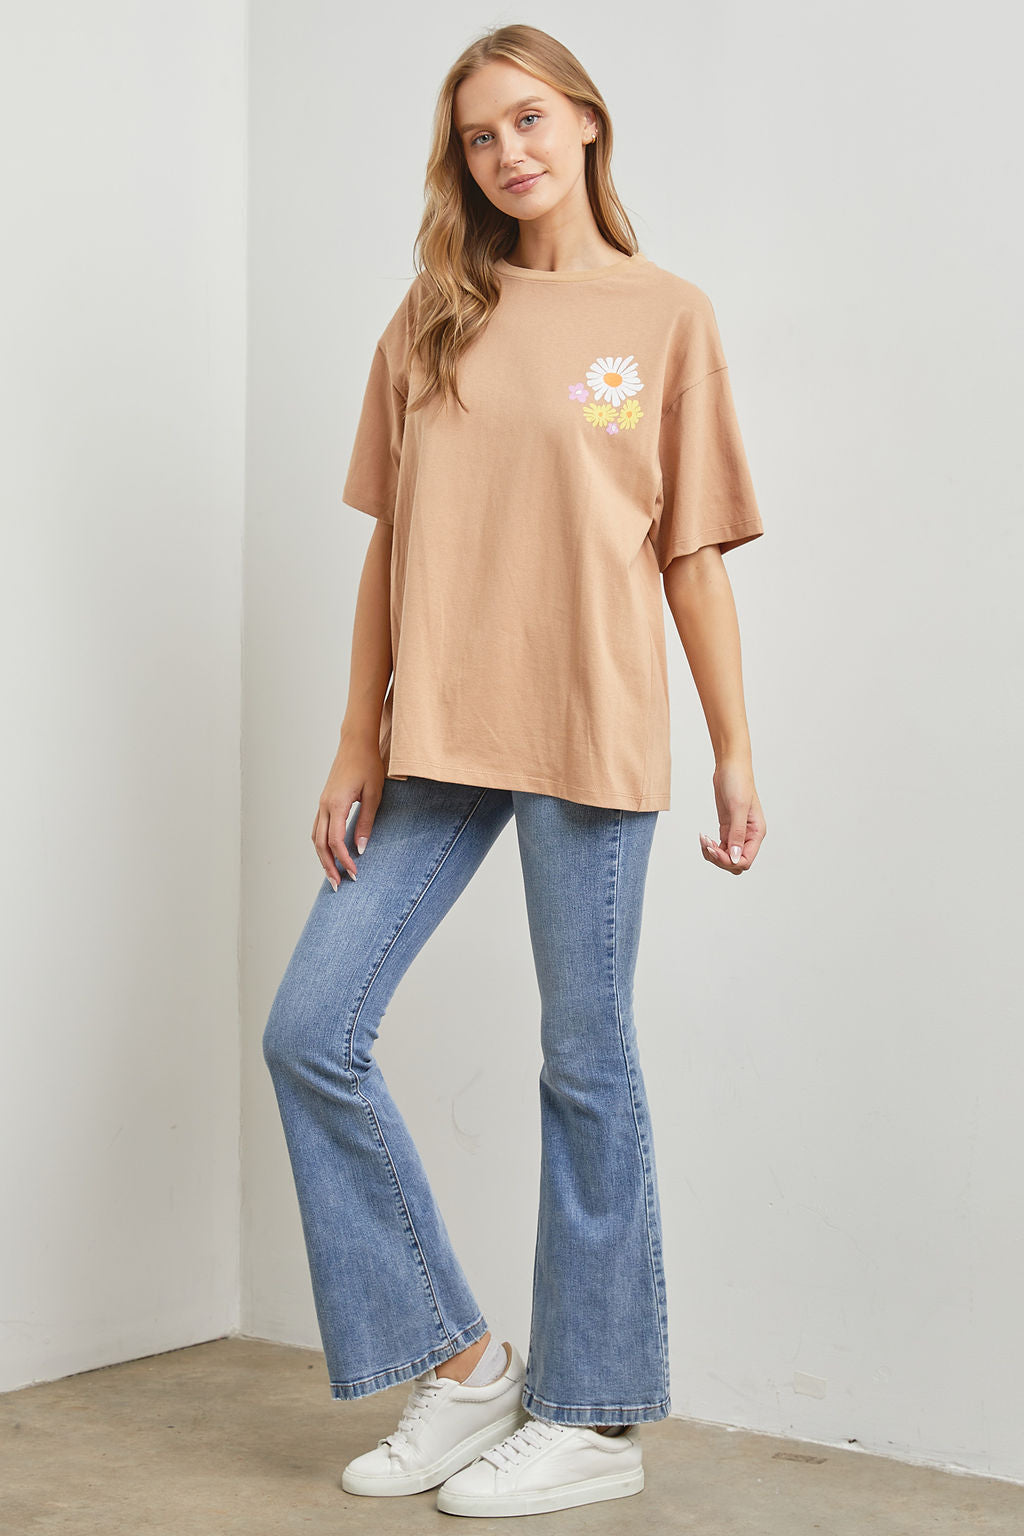 Floral Canvas Tee - Camel